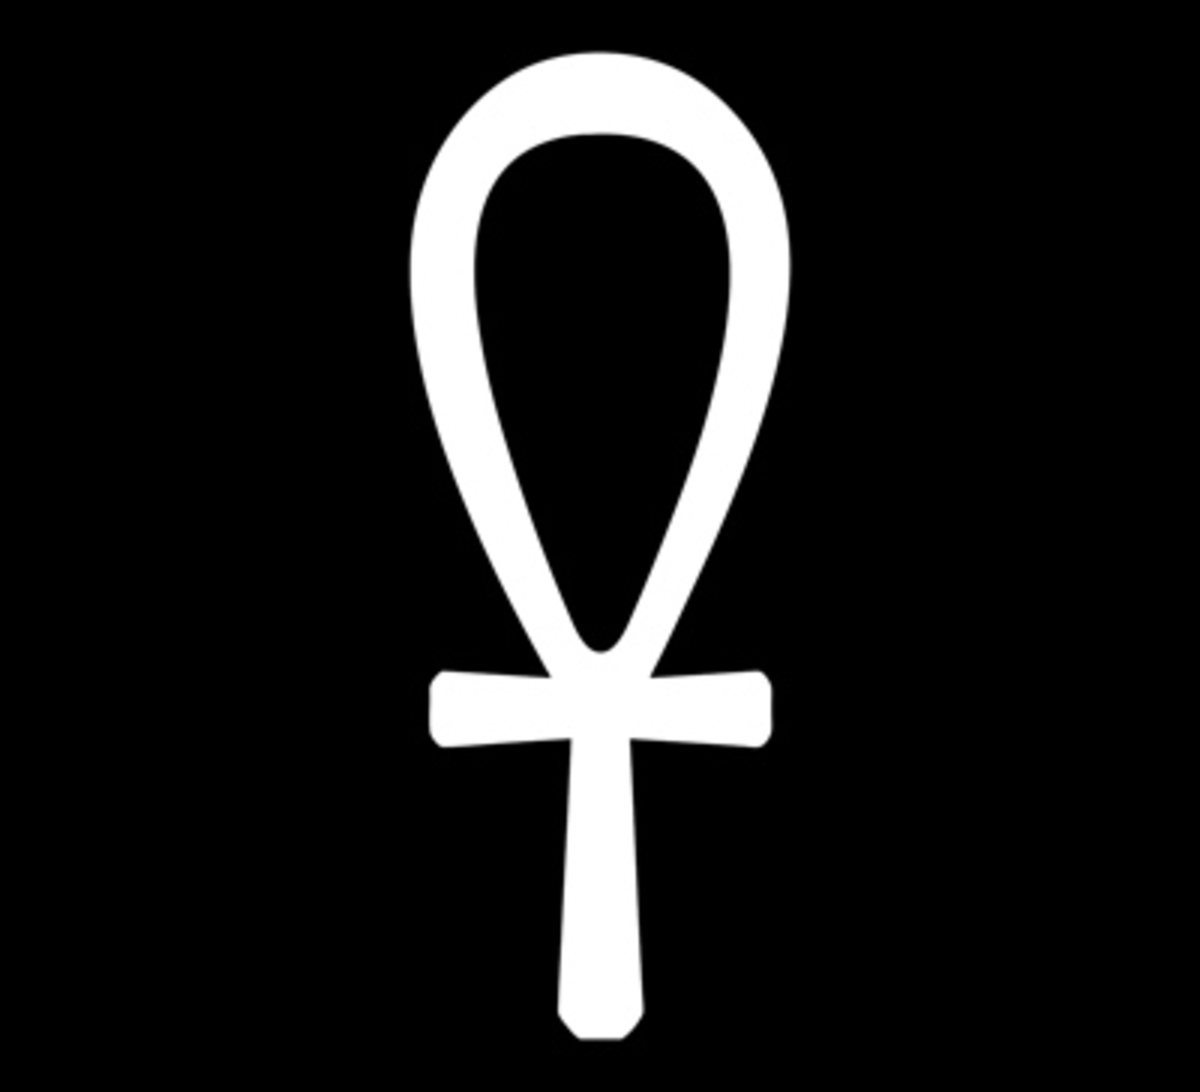 The Egyptian Ankh symbol stands for Eternity.